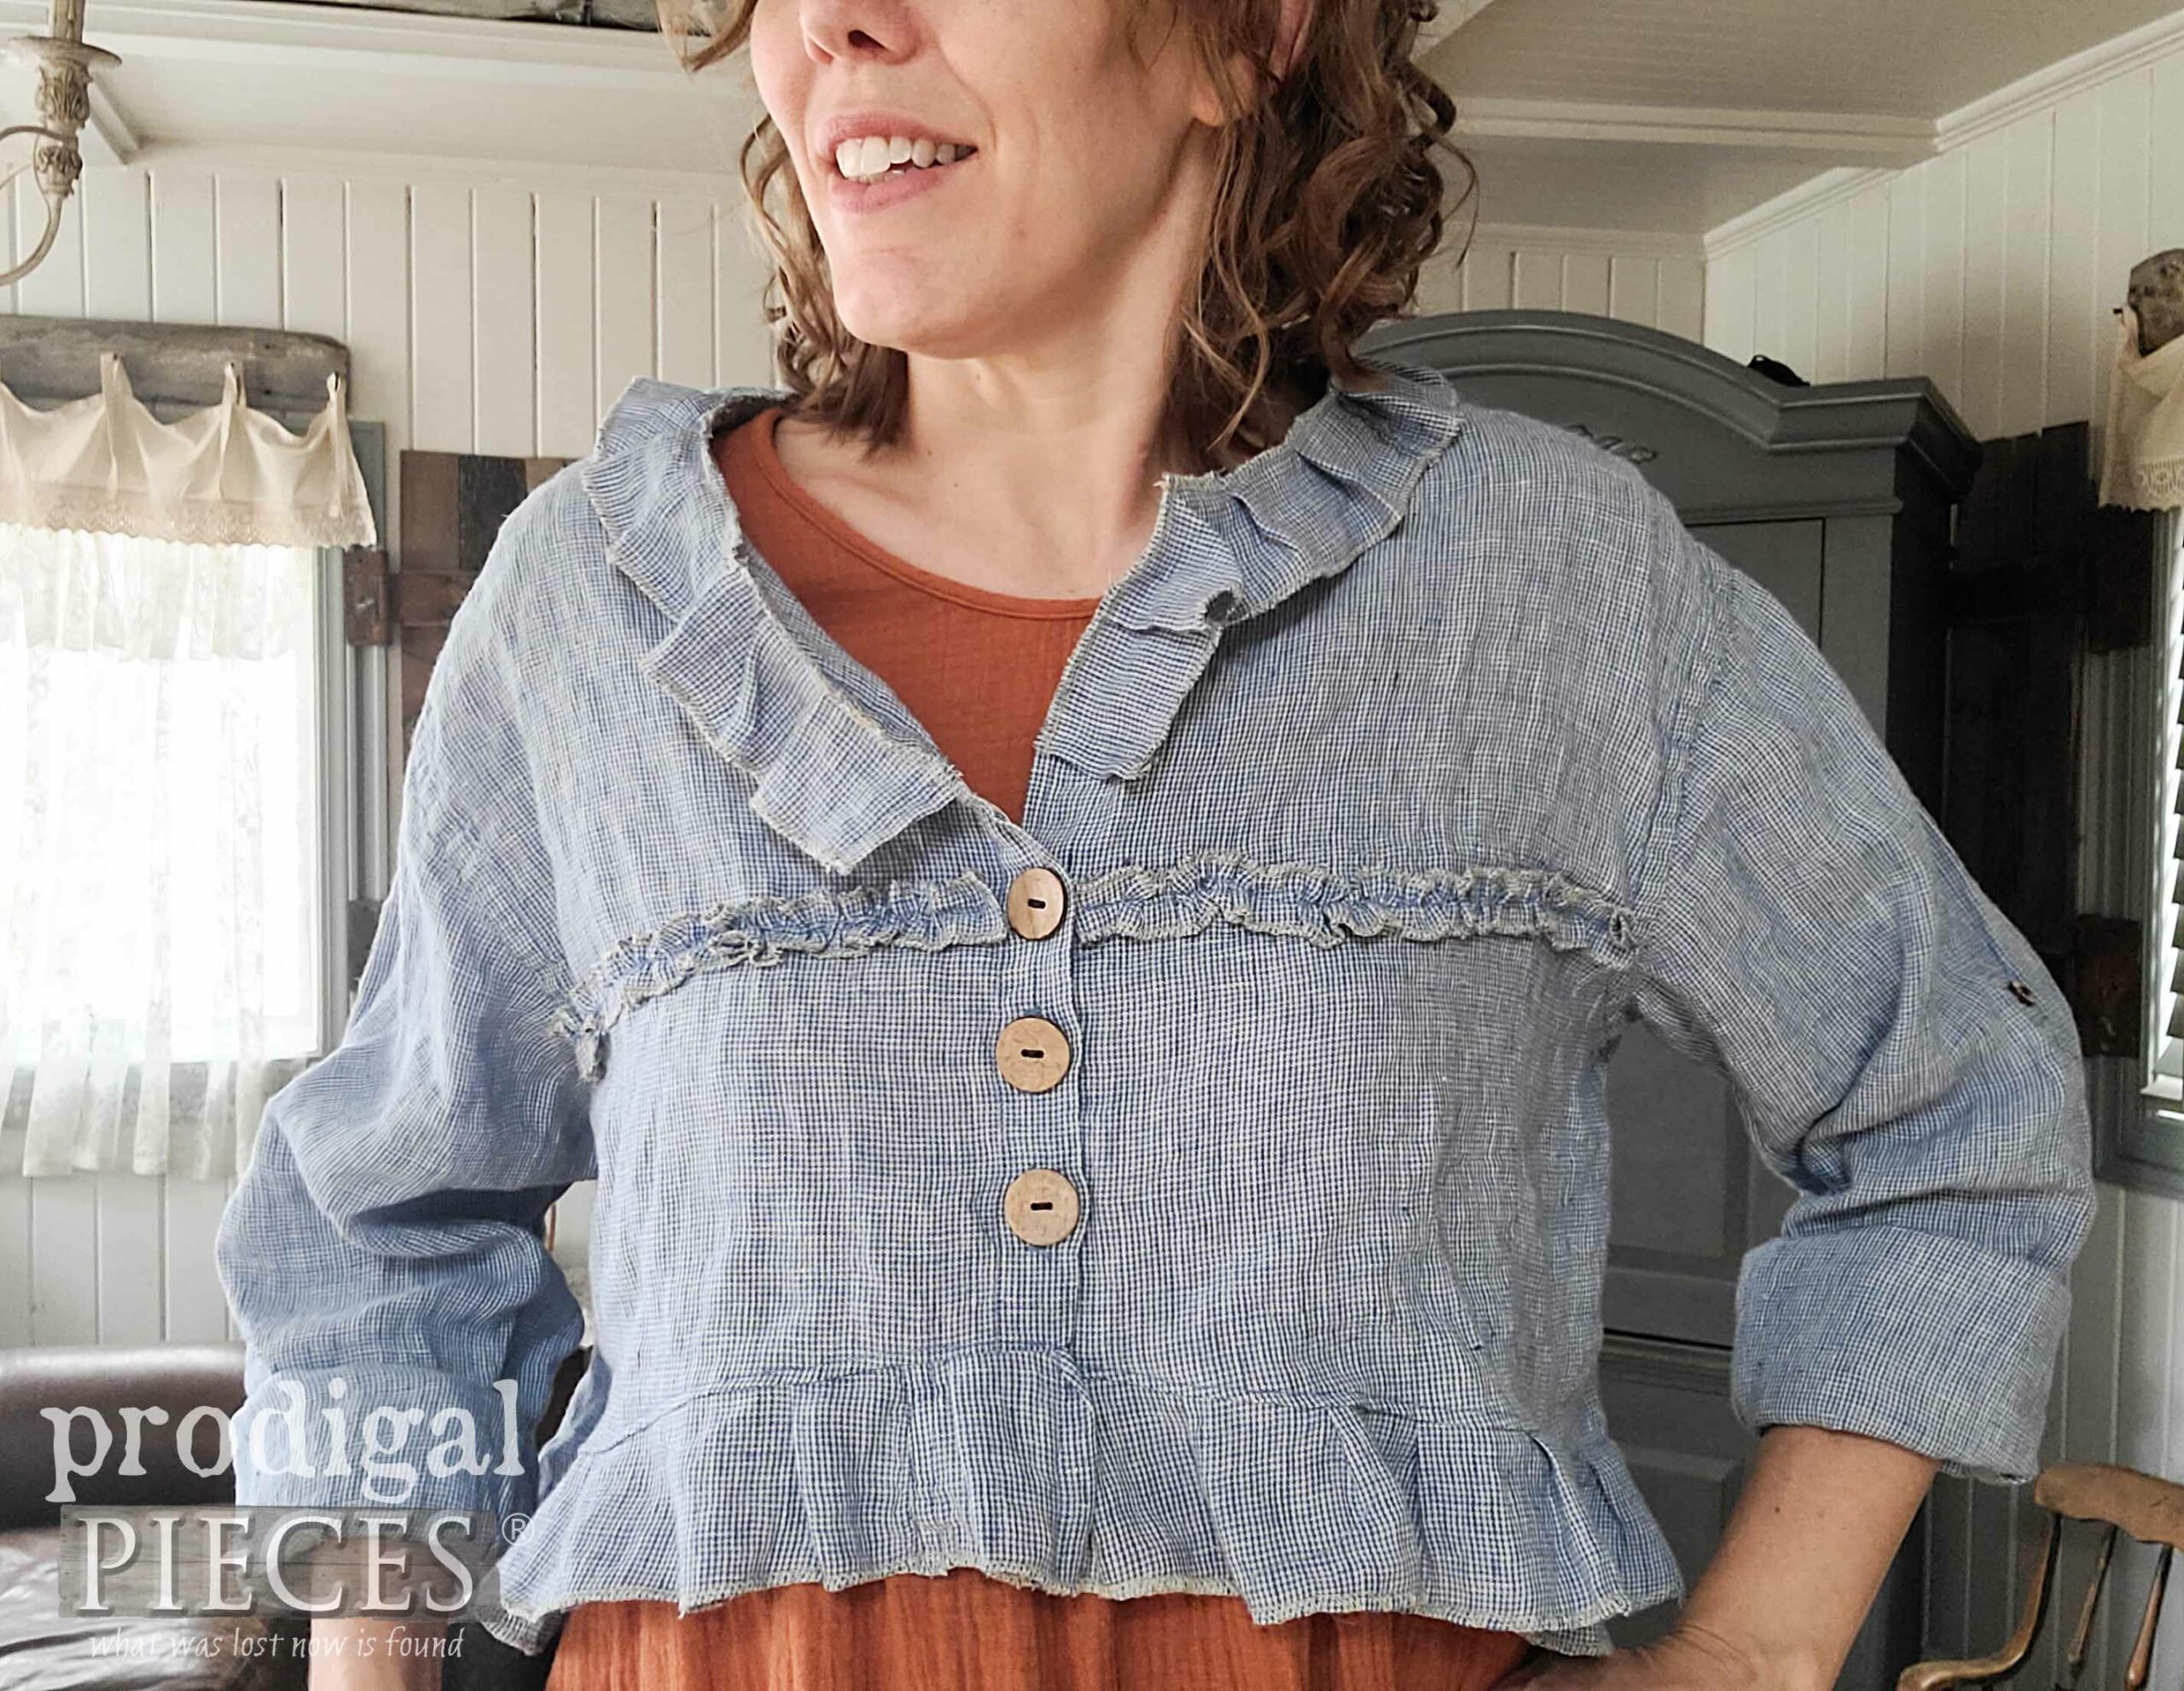 Blue Stripe Handmade Linen Jacket from Refashioned Shirt by Larissa of Prodigal Pieces | prodigalpieces.com #prodigalpieces #style #fashion #handmade